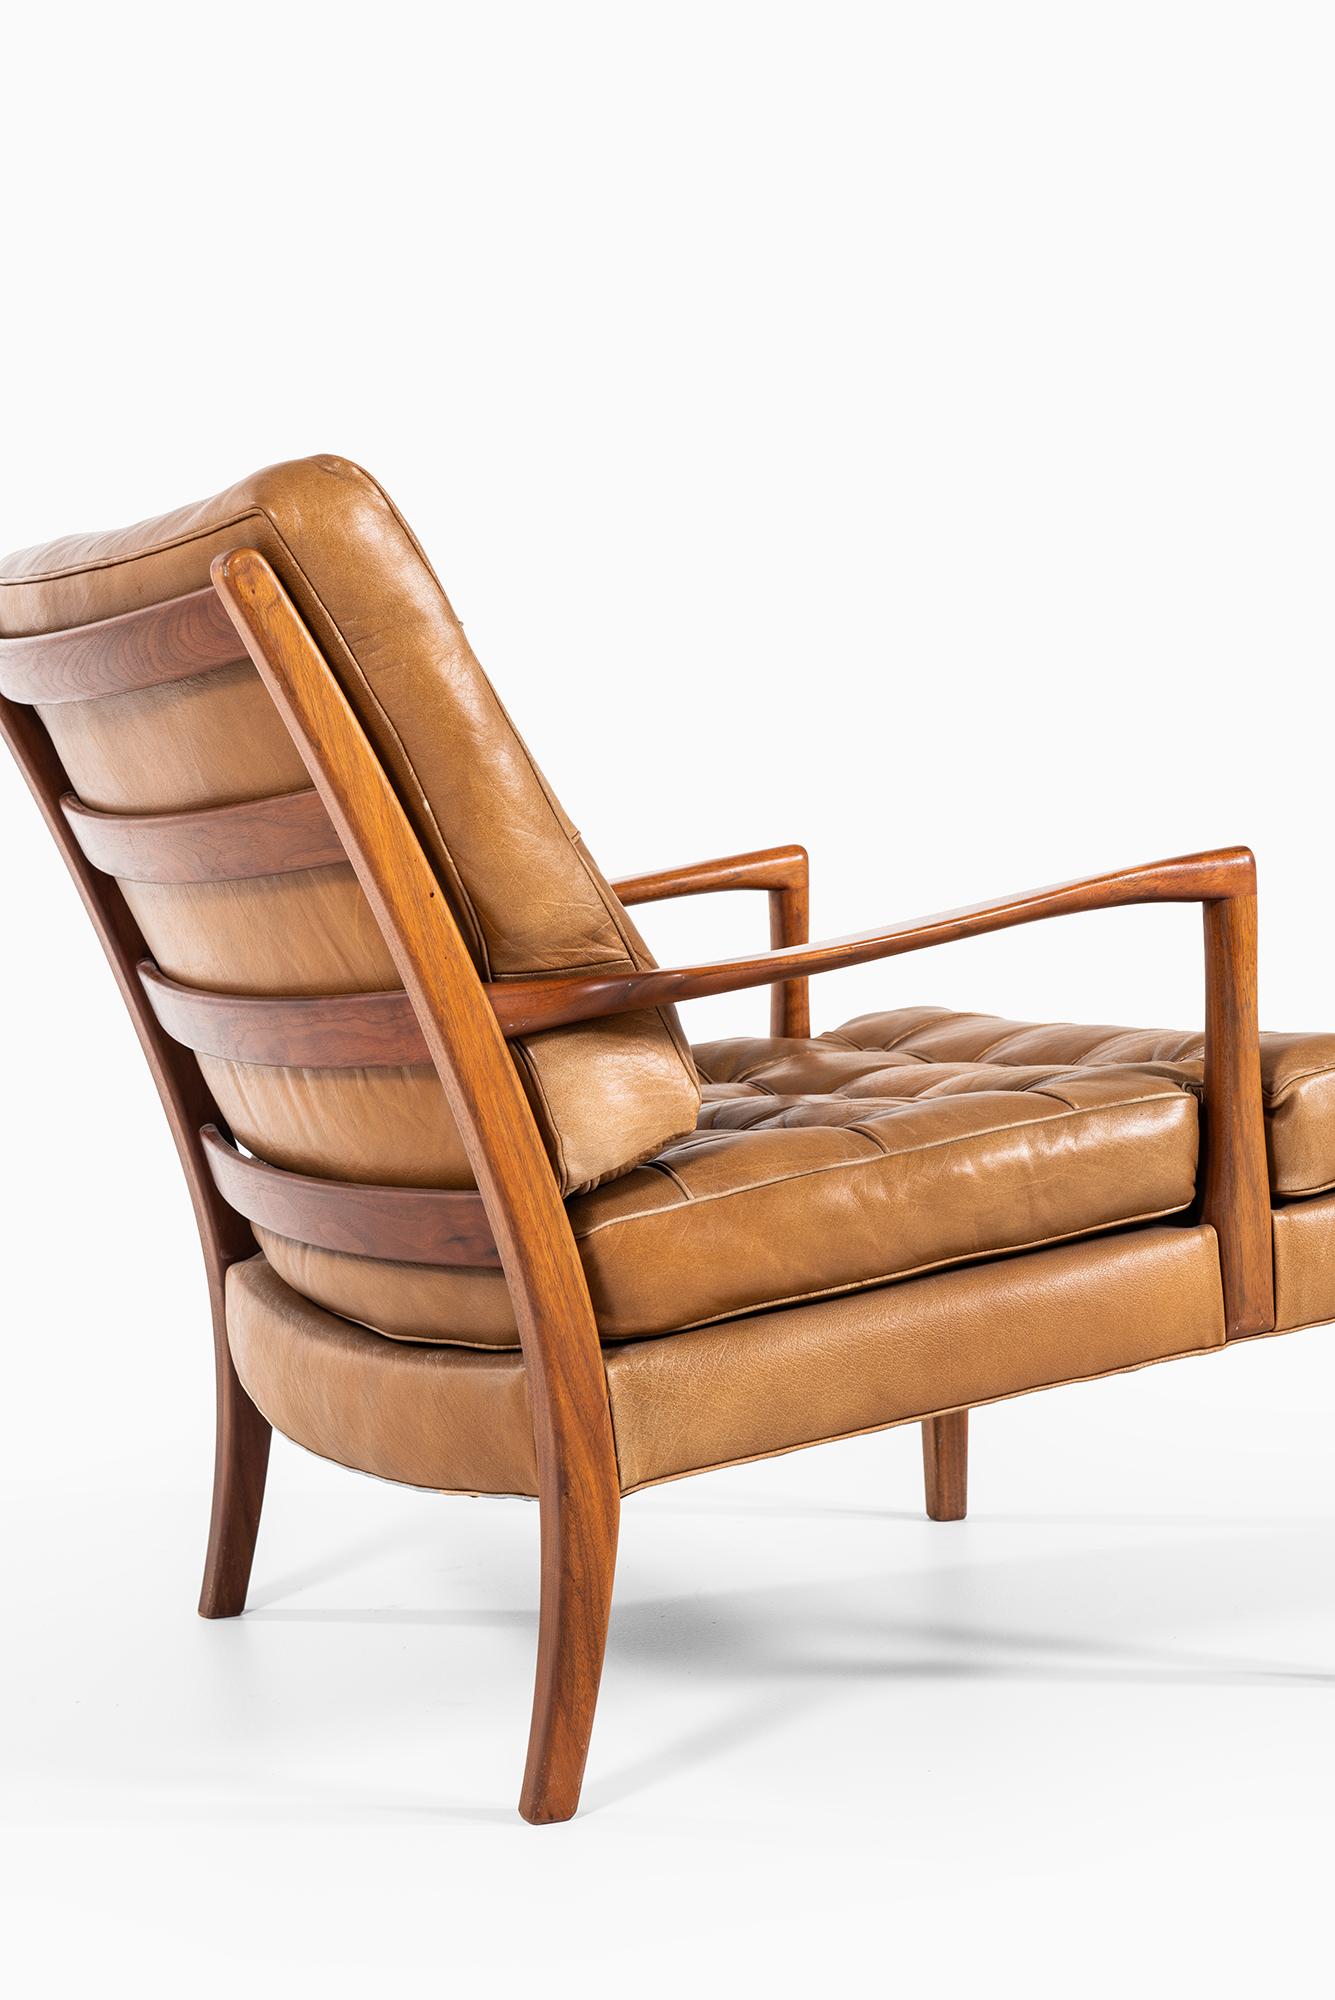 Mid-20th Century Arne Norell Easy Chair Model Löven by Arne Norell AB in Sweden For Sale